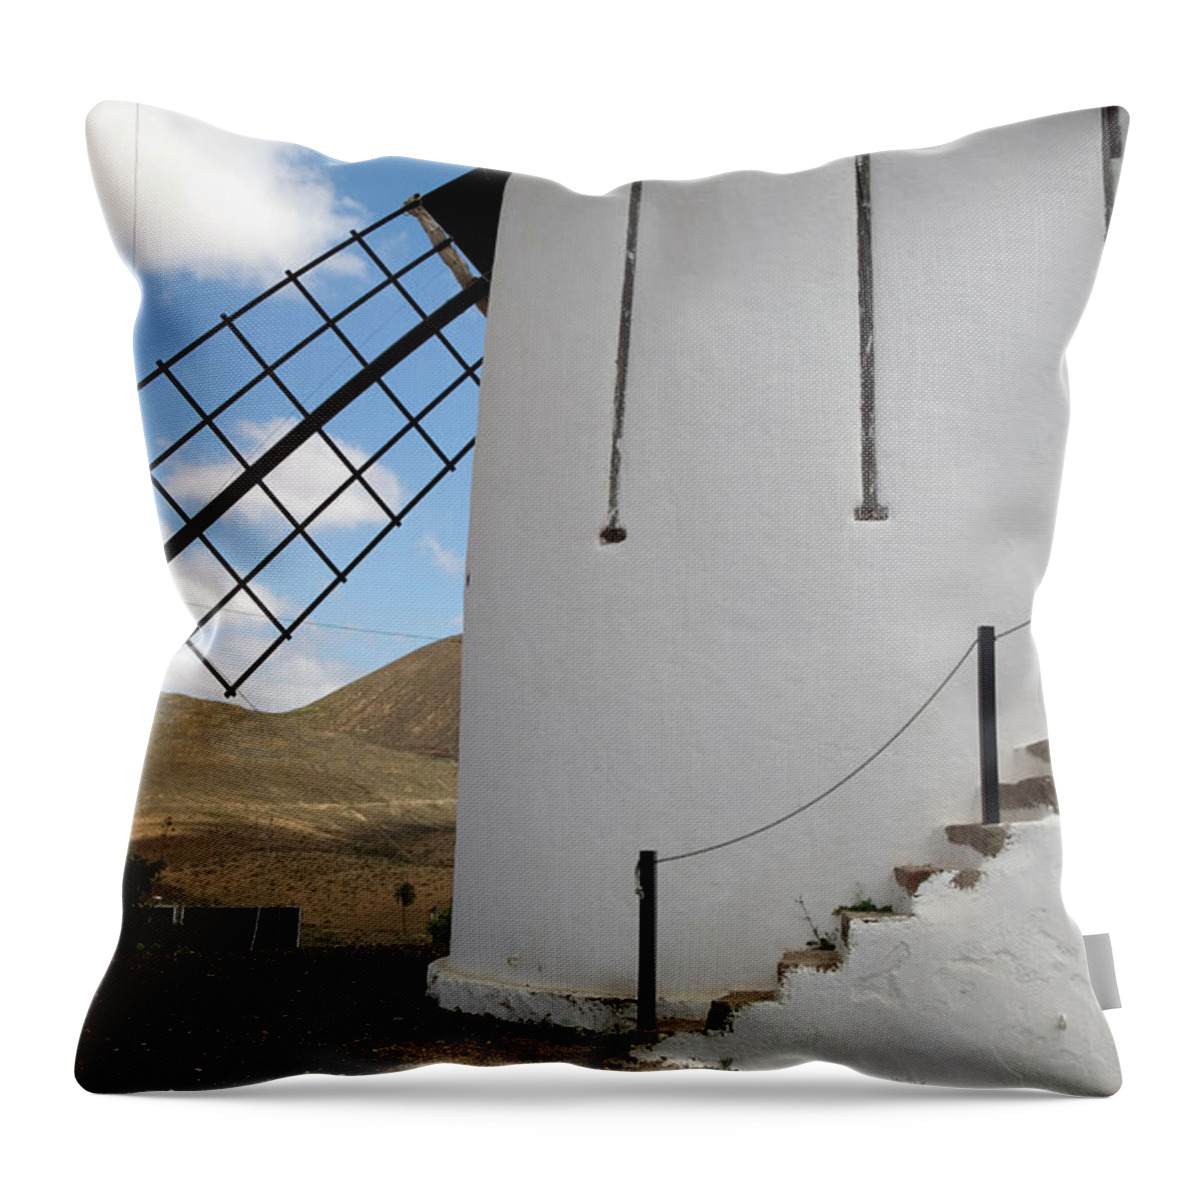 Fuerteventura Throw Pillow featuring the photograph Old Windmill Of Tiscamanita by Roel Meijer